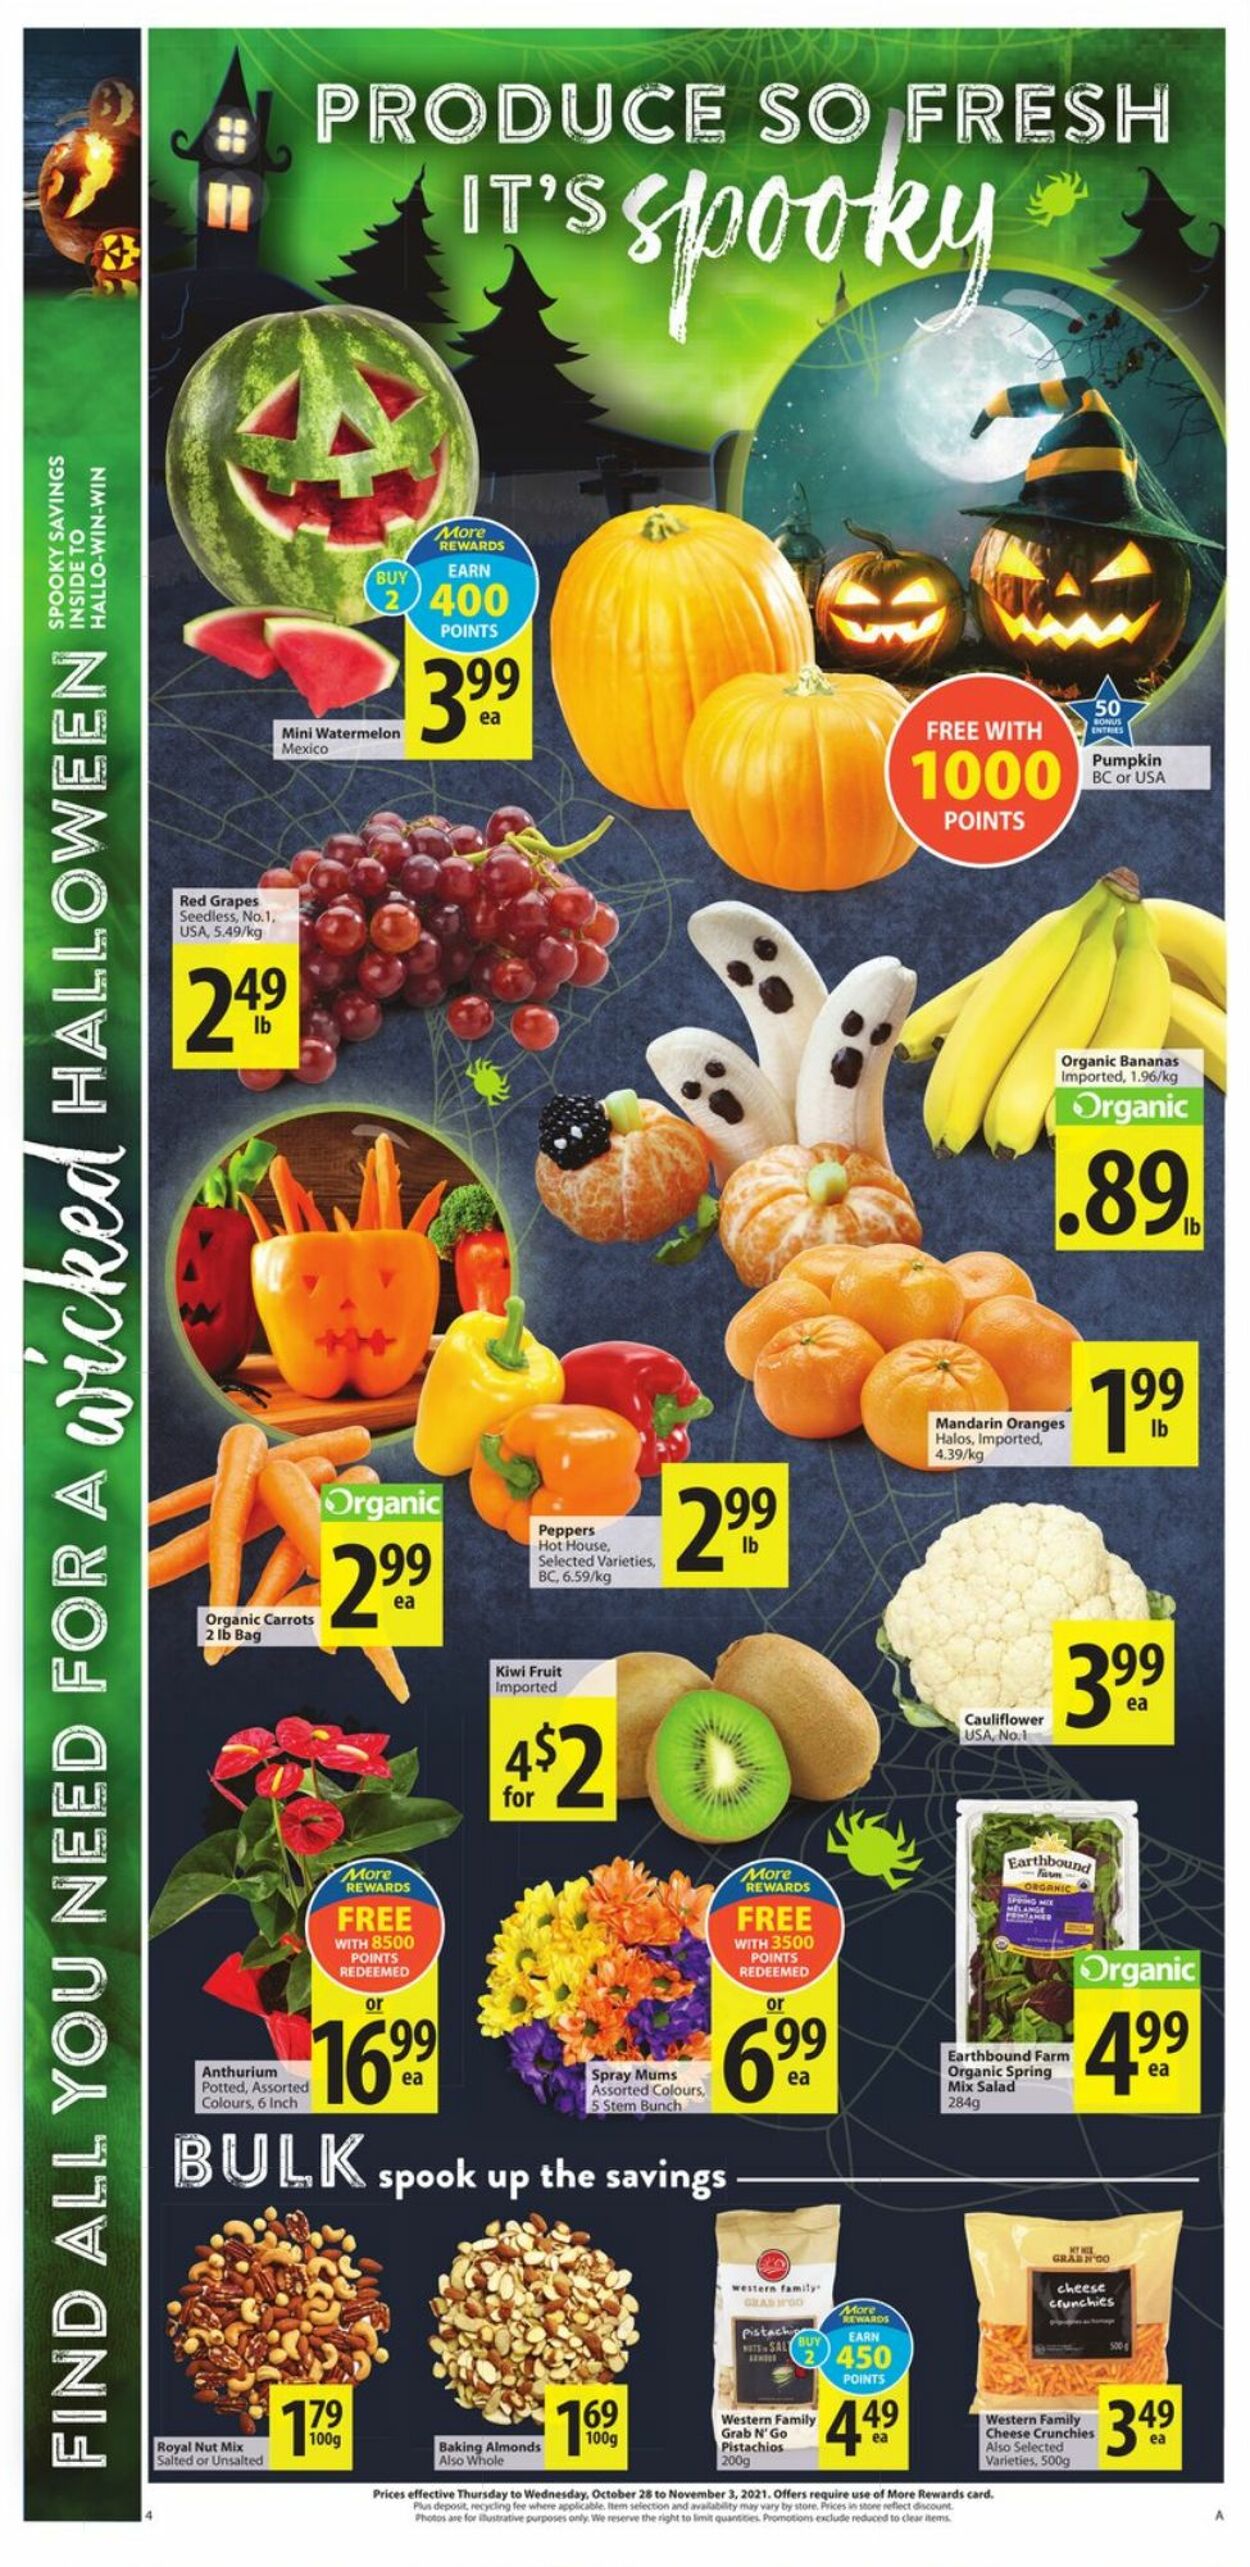 Flyer Save-On-Foods 28.10.2021 - 03.11.2021